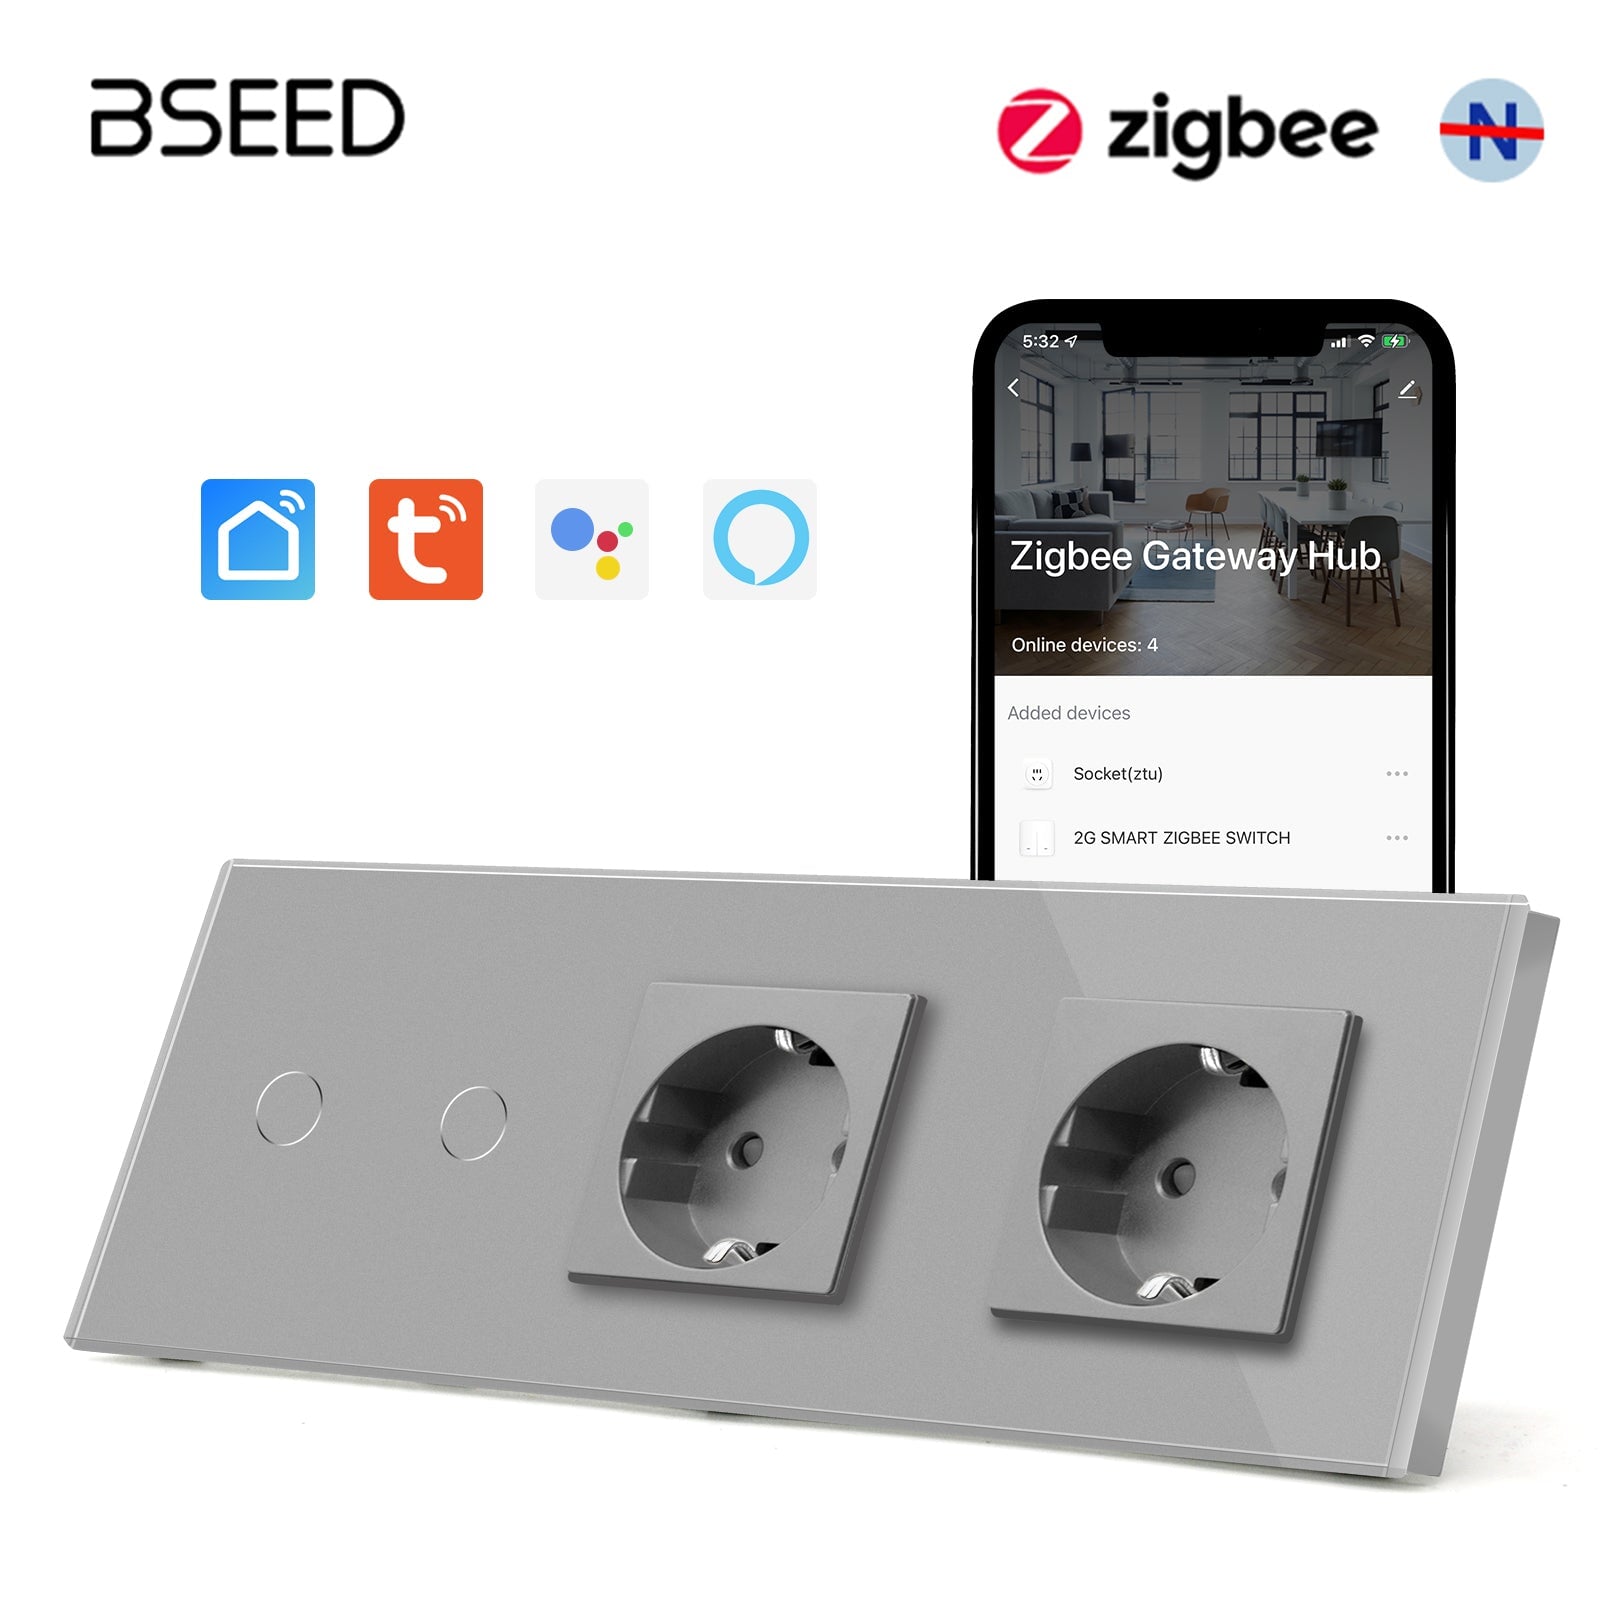 Bseed Zigbee Touch 1/2/3 Gang Light Switches Single Live Line Multi Control With Double EU Standard Not Smart Wall Sockets Light Switches Bseedswitch Grey 2Gang 